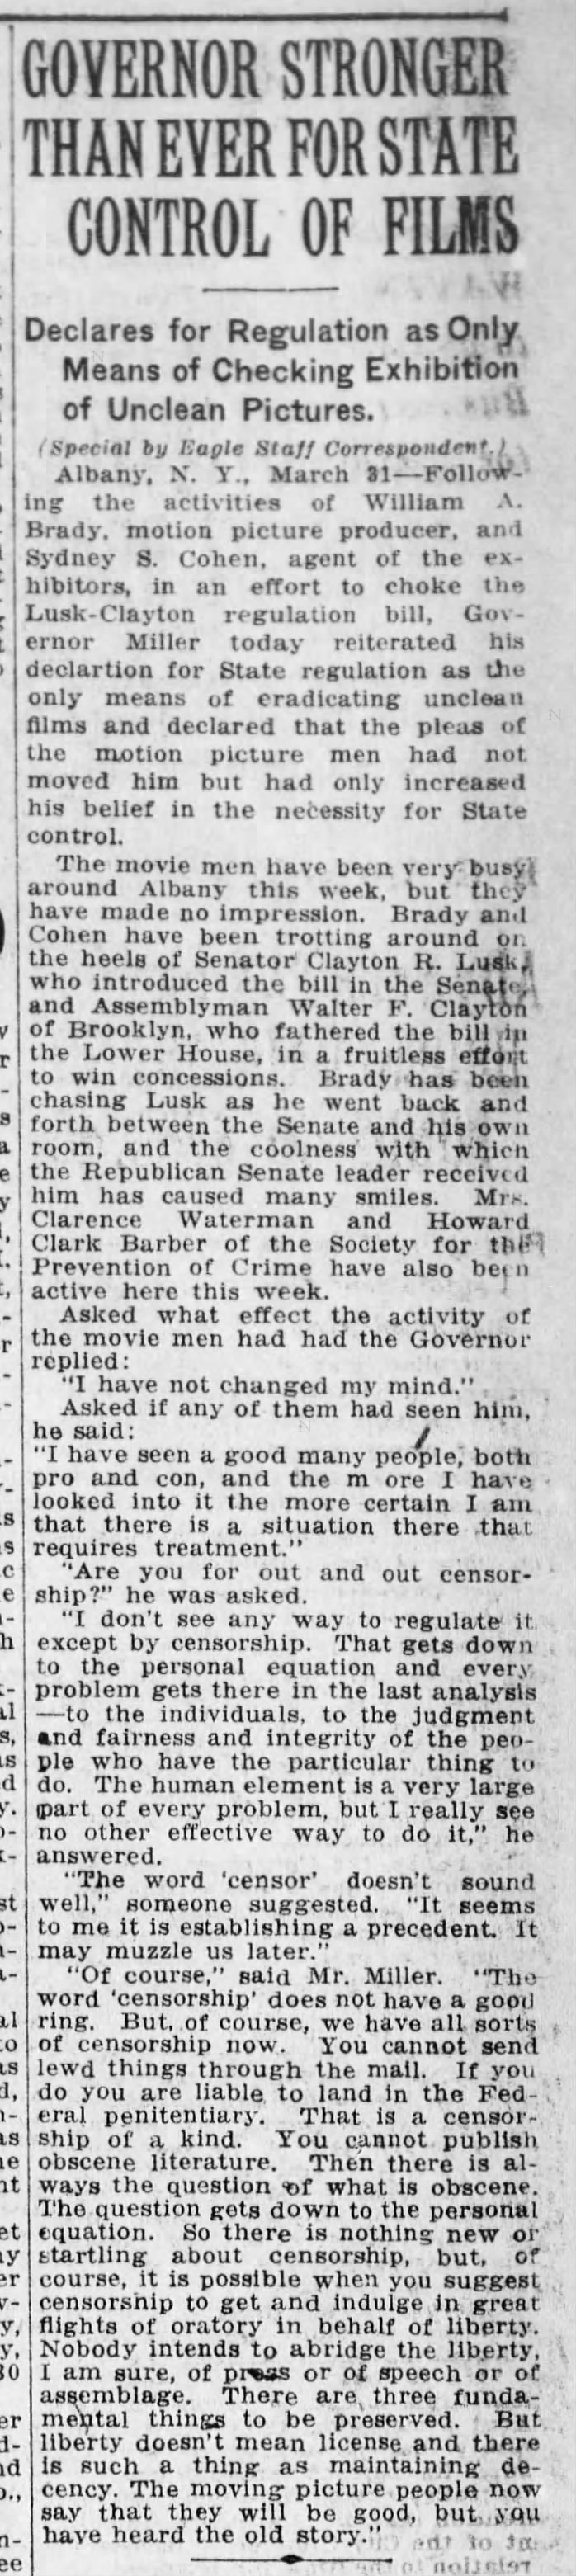 state control of films-3-31-1921-brooklyn-daily eagle